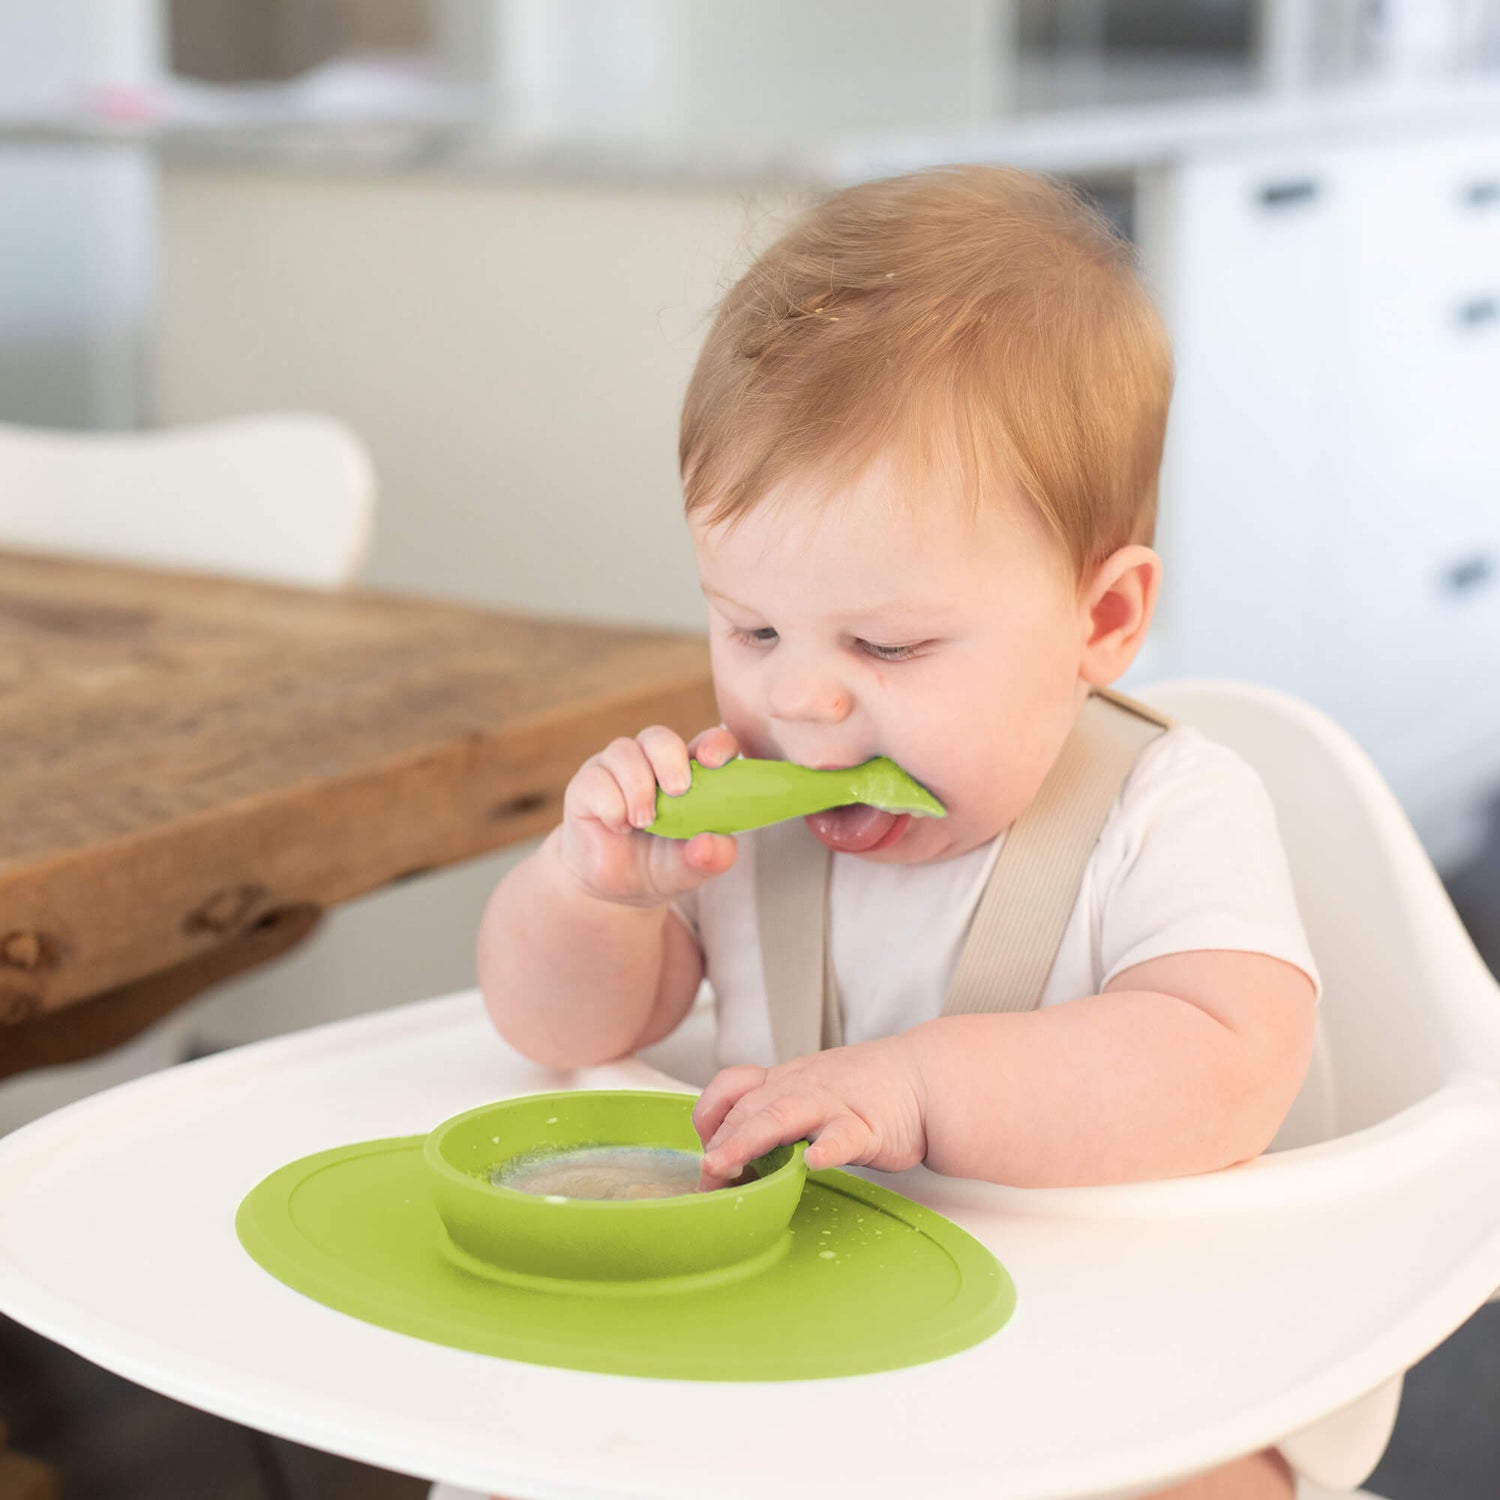 The Tiny Spoon in Lime by ezpz / Small, Sensory Silicone Spoon for Babies